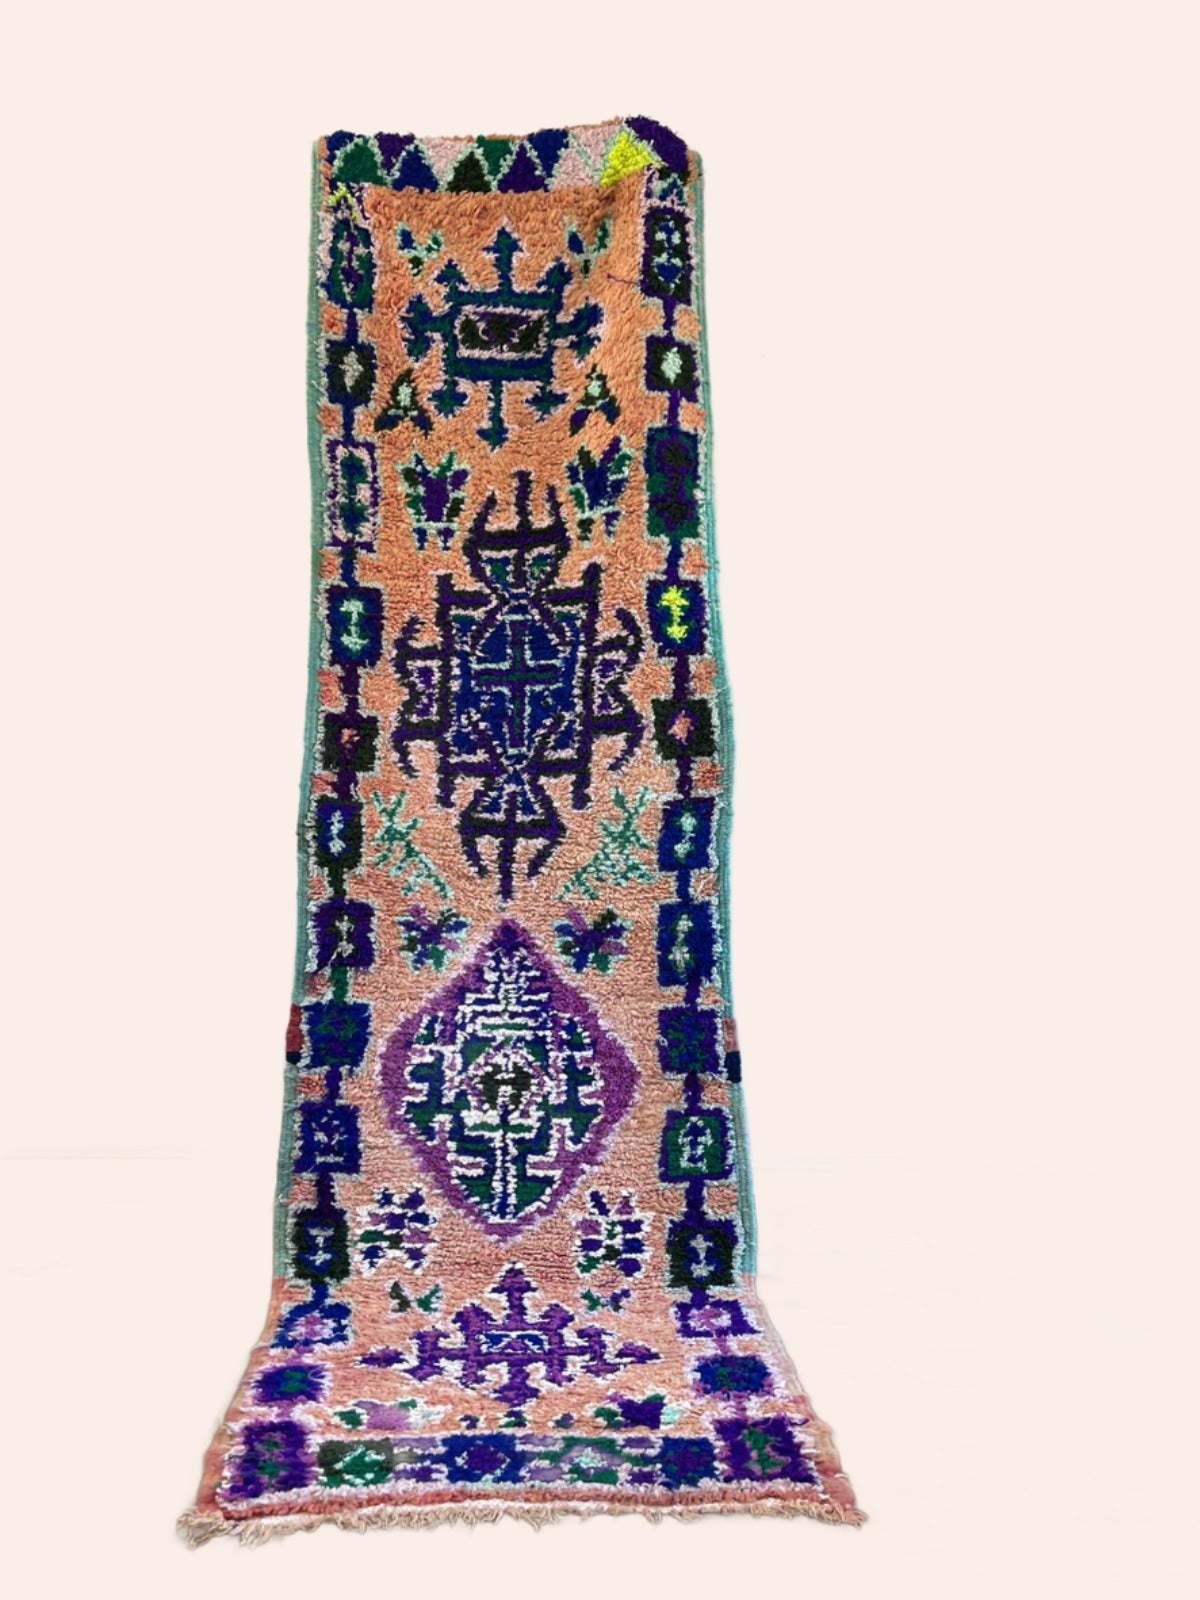 Vintage peach Moroccan runner with blue and purple tribal patterns and symbols 